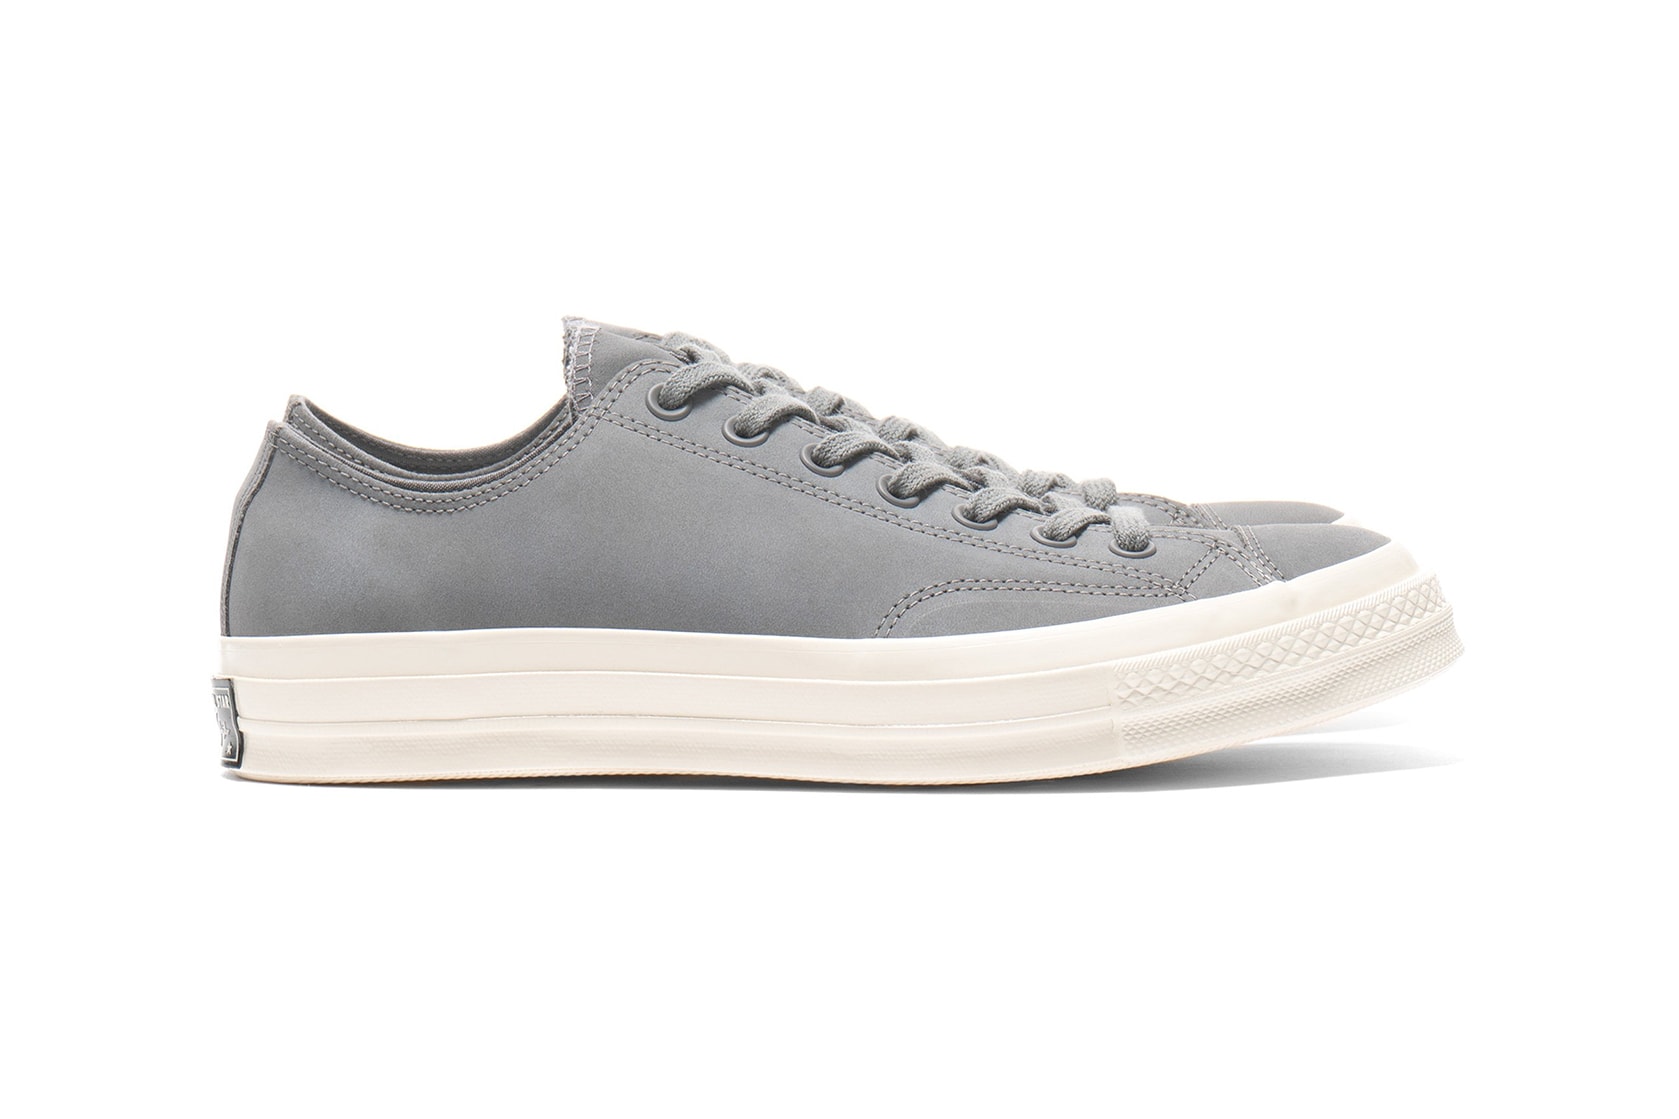 Converse Chuck Taylor All Star 1970 Nubuck Release Details Sneakers Shoes Trainers Kicks Footwear Available Cop Purchase Buy Now Haven Shop